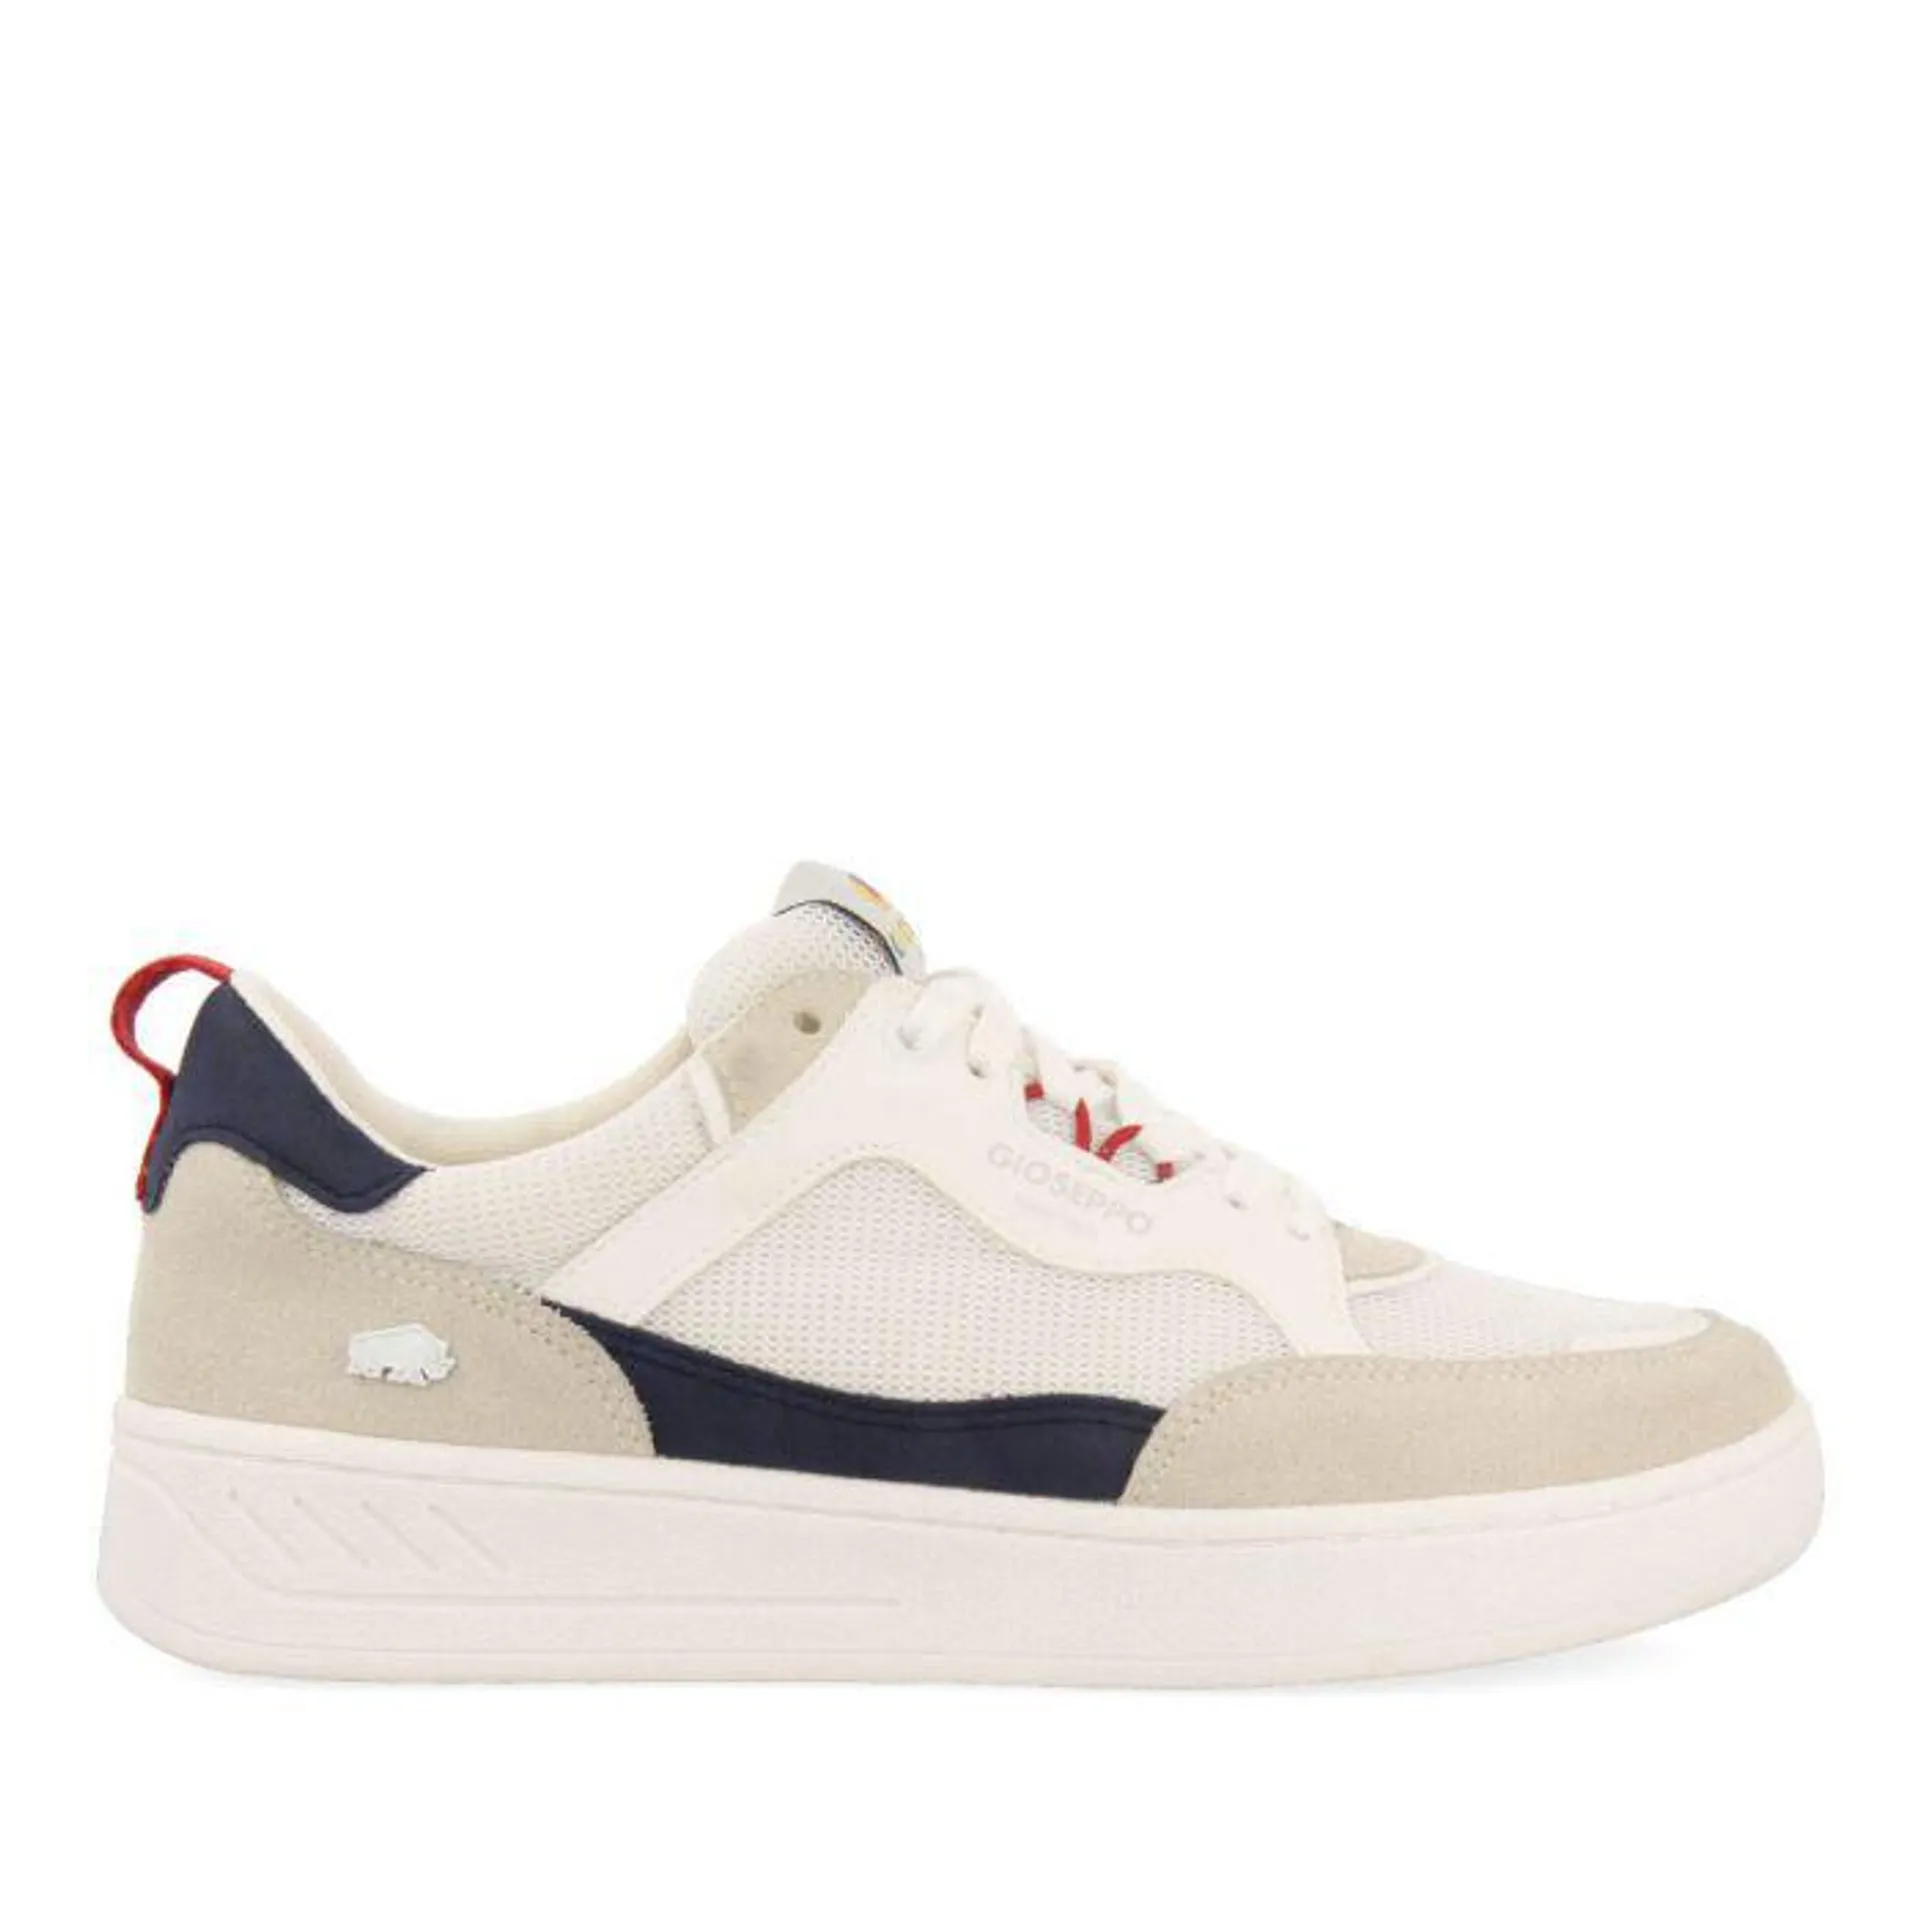 Taxco men's white sneakers with colourful touches